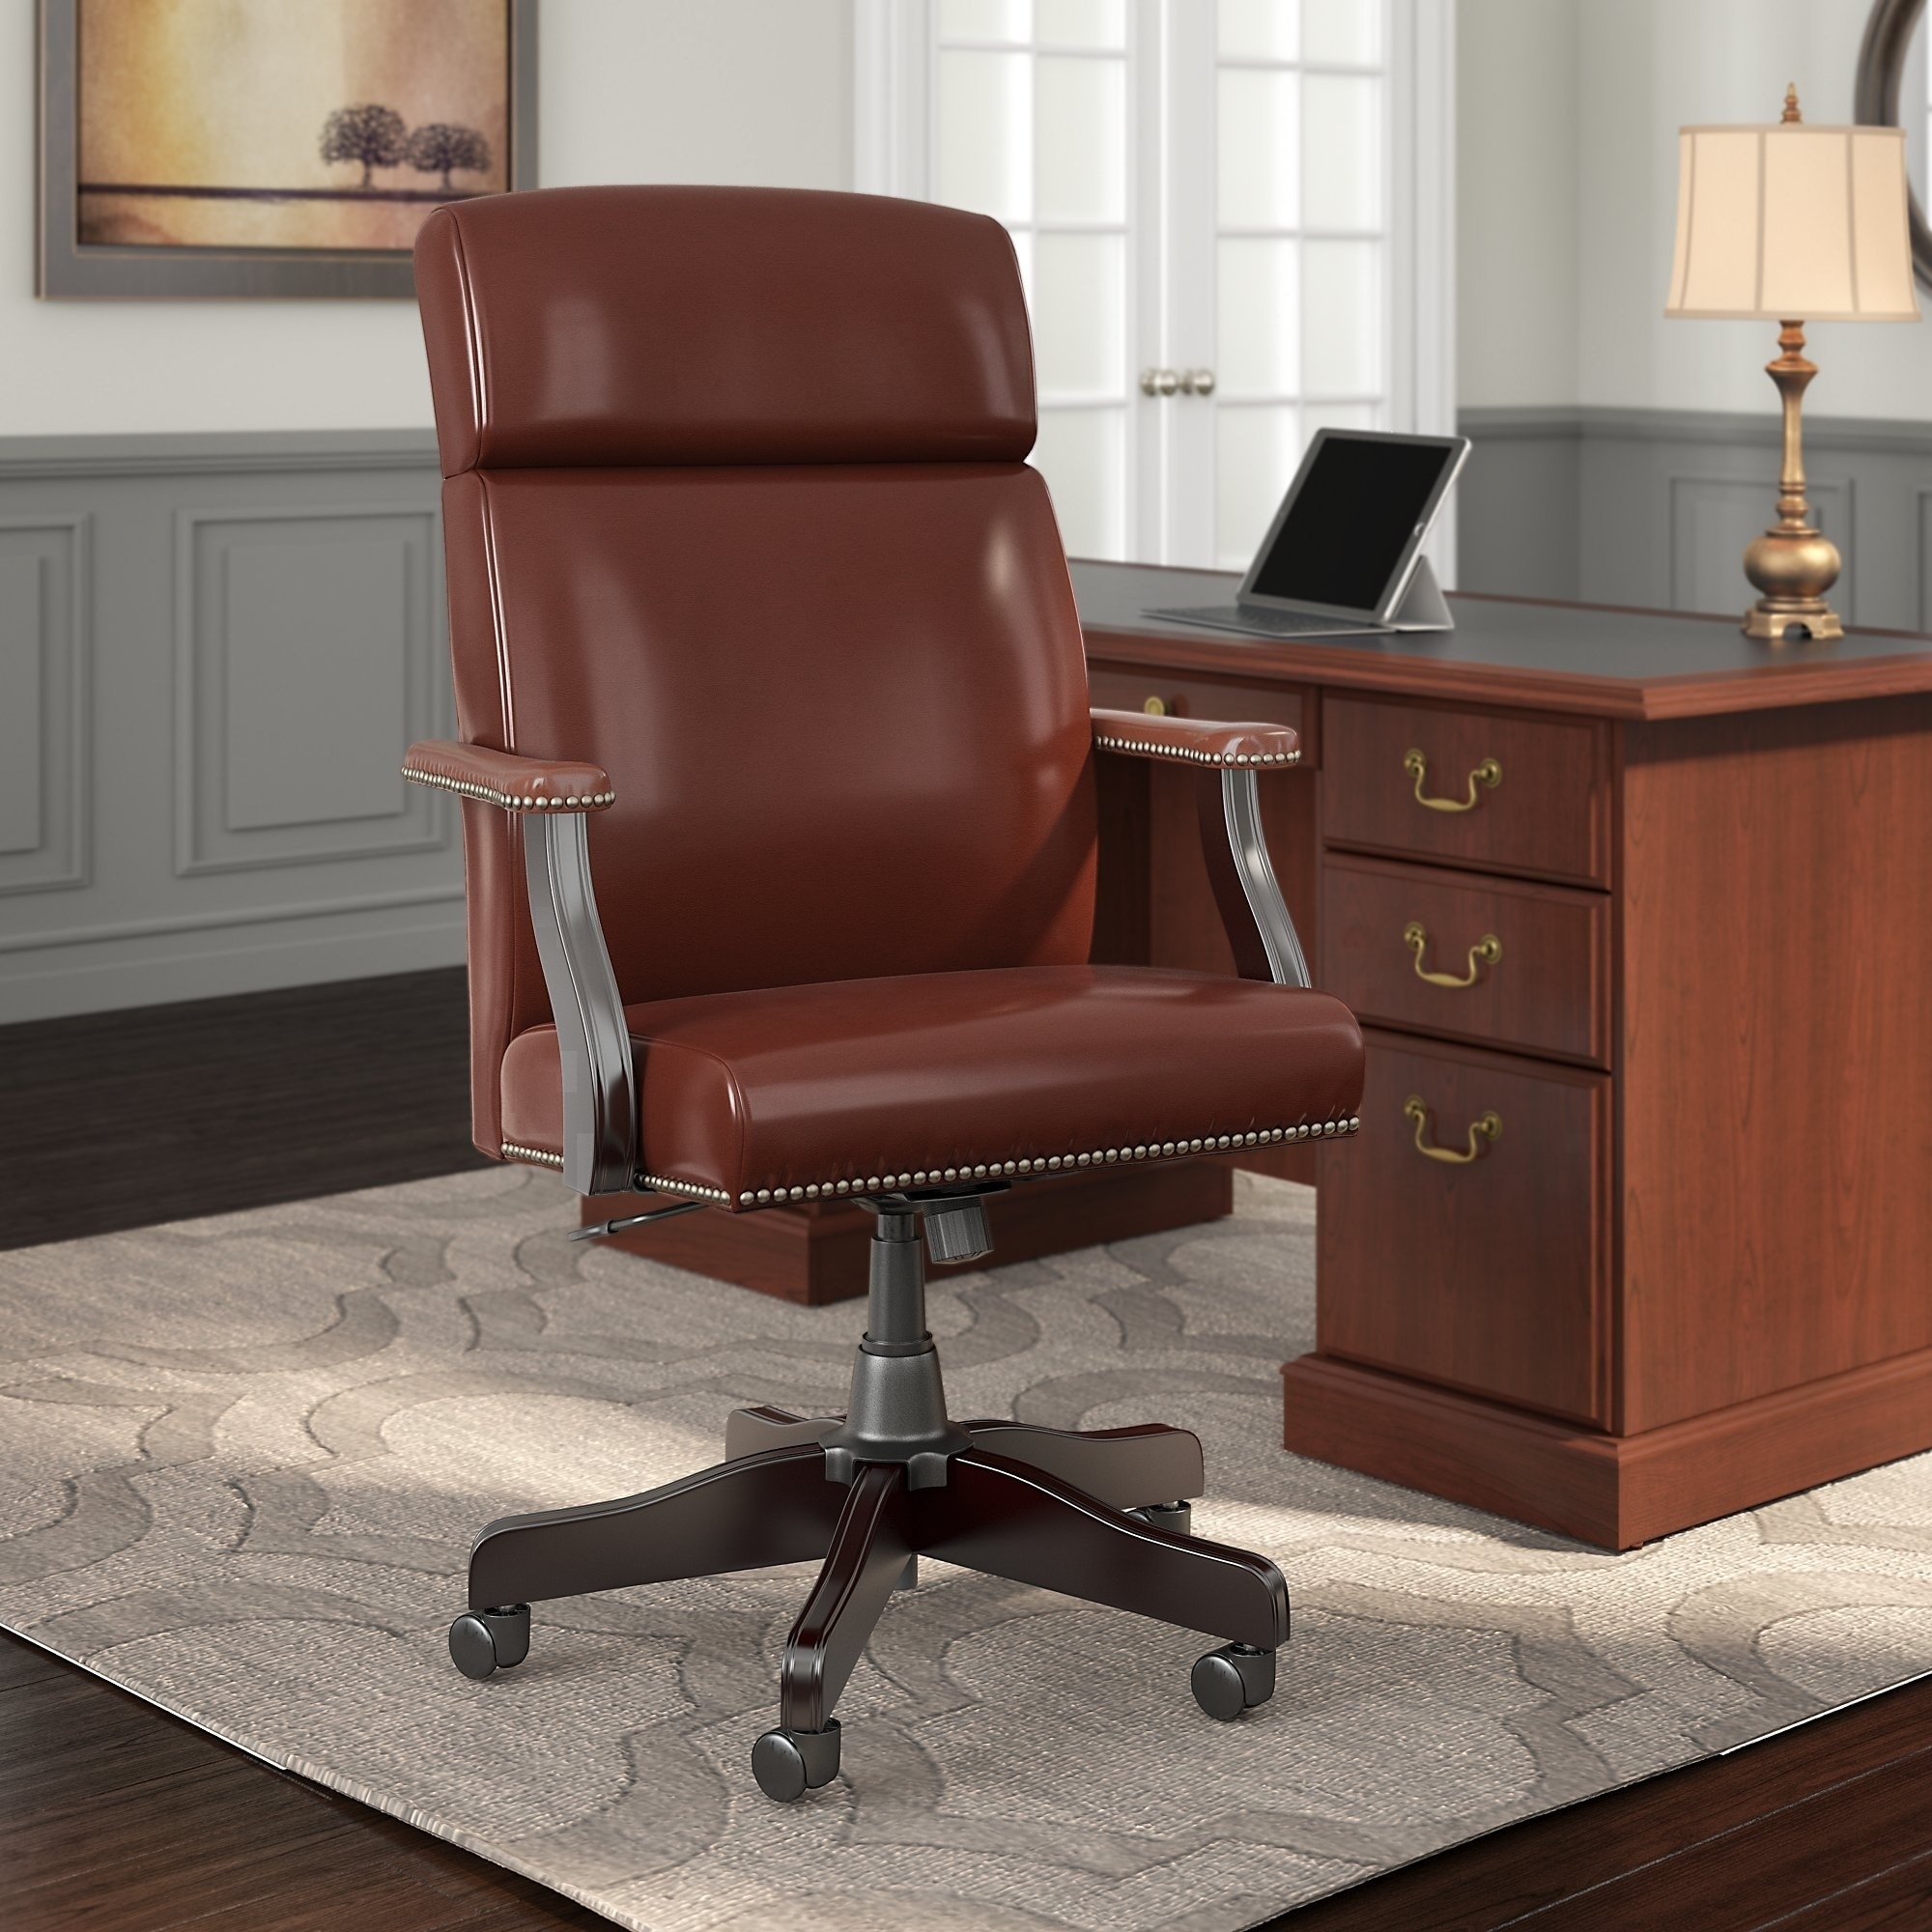 Shop Copper Grove Dobrich High Back Leather Executive Office Chair